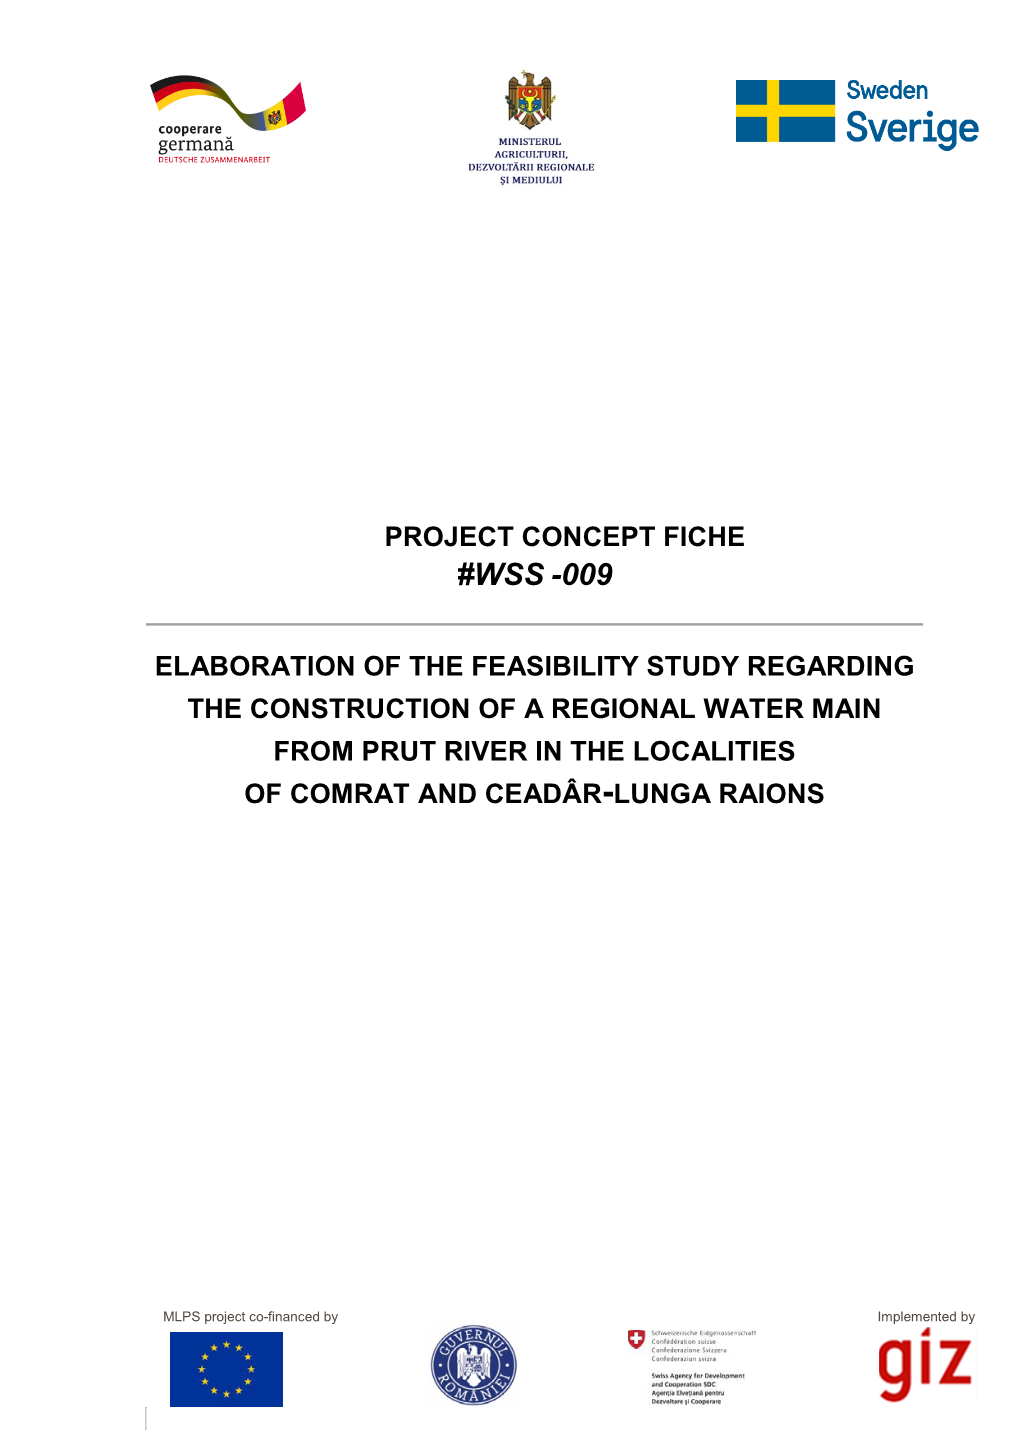 Elaboration of the Feasibility Study Regarding the Construction of a Regional Water Main from Prut River in the Localities of Comrat and Ceadâr-Lunga Raions